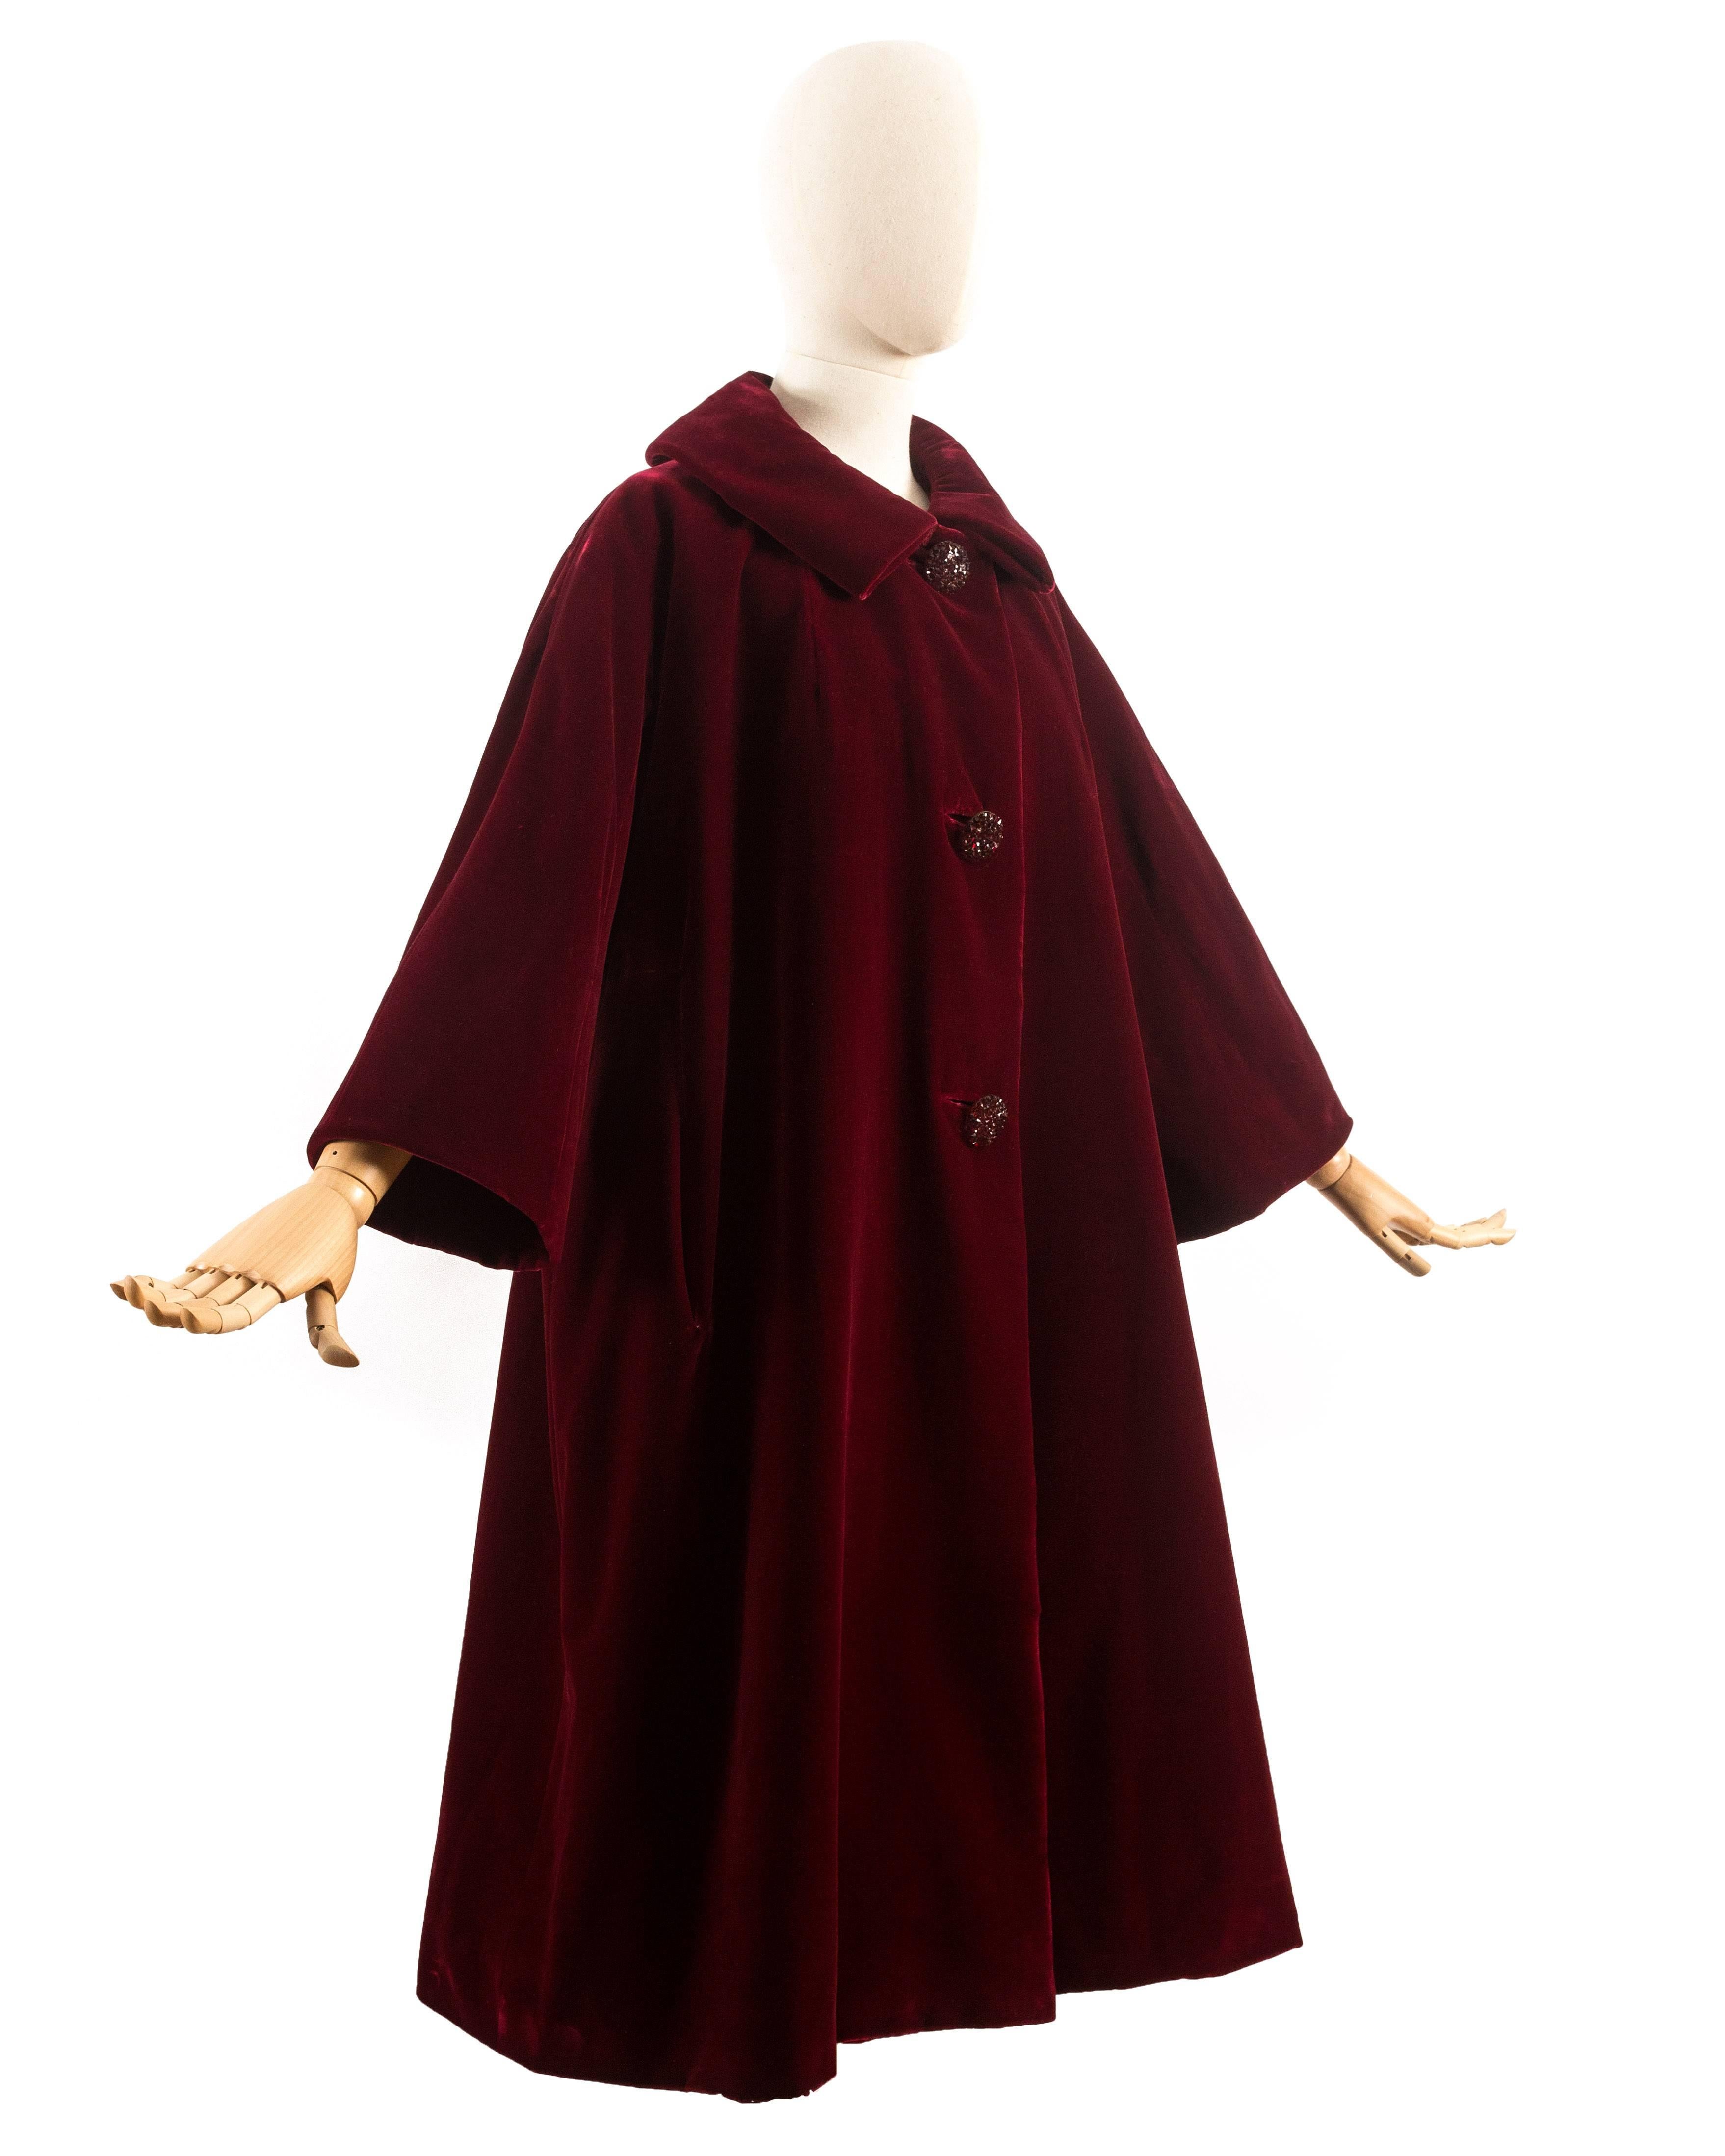 Christian Dior Haute Couture Autumn-Winter 1956 royal red silk velvet opera coat with three stoned button closures, Peter Pan collar, three-quarter length sleeves, and two hidden side pockets. 